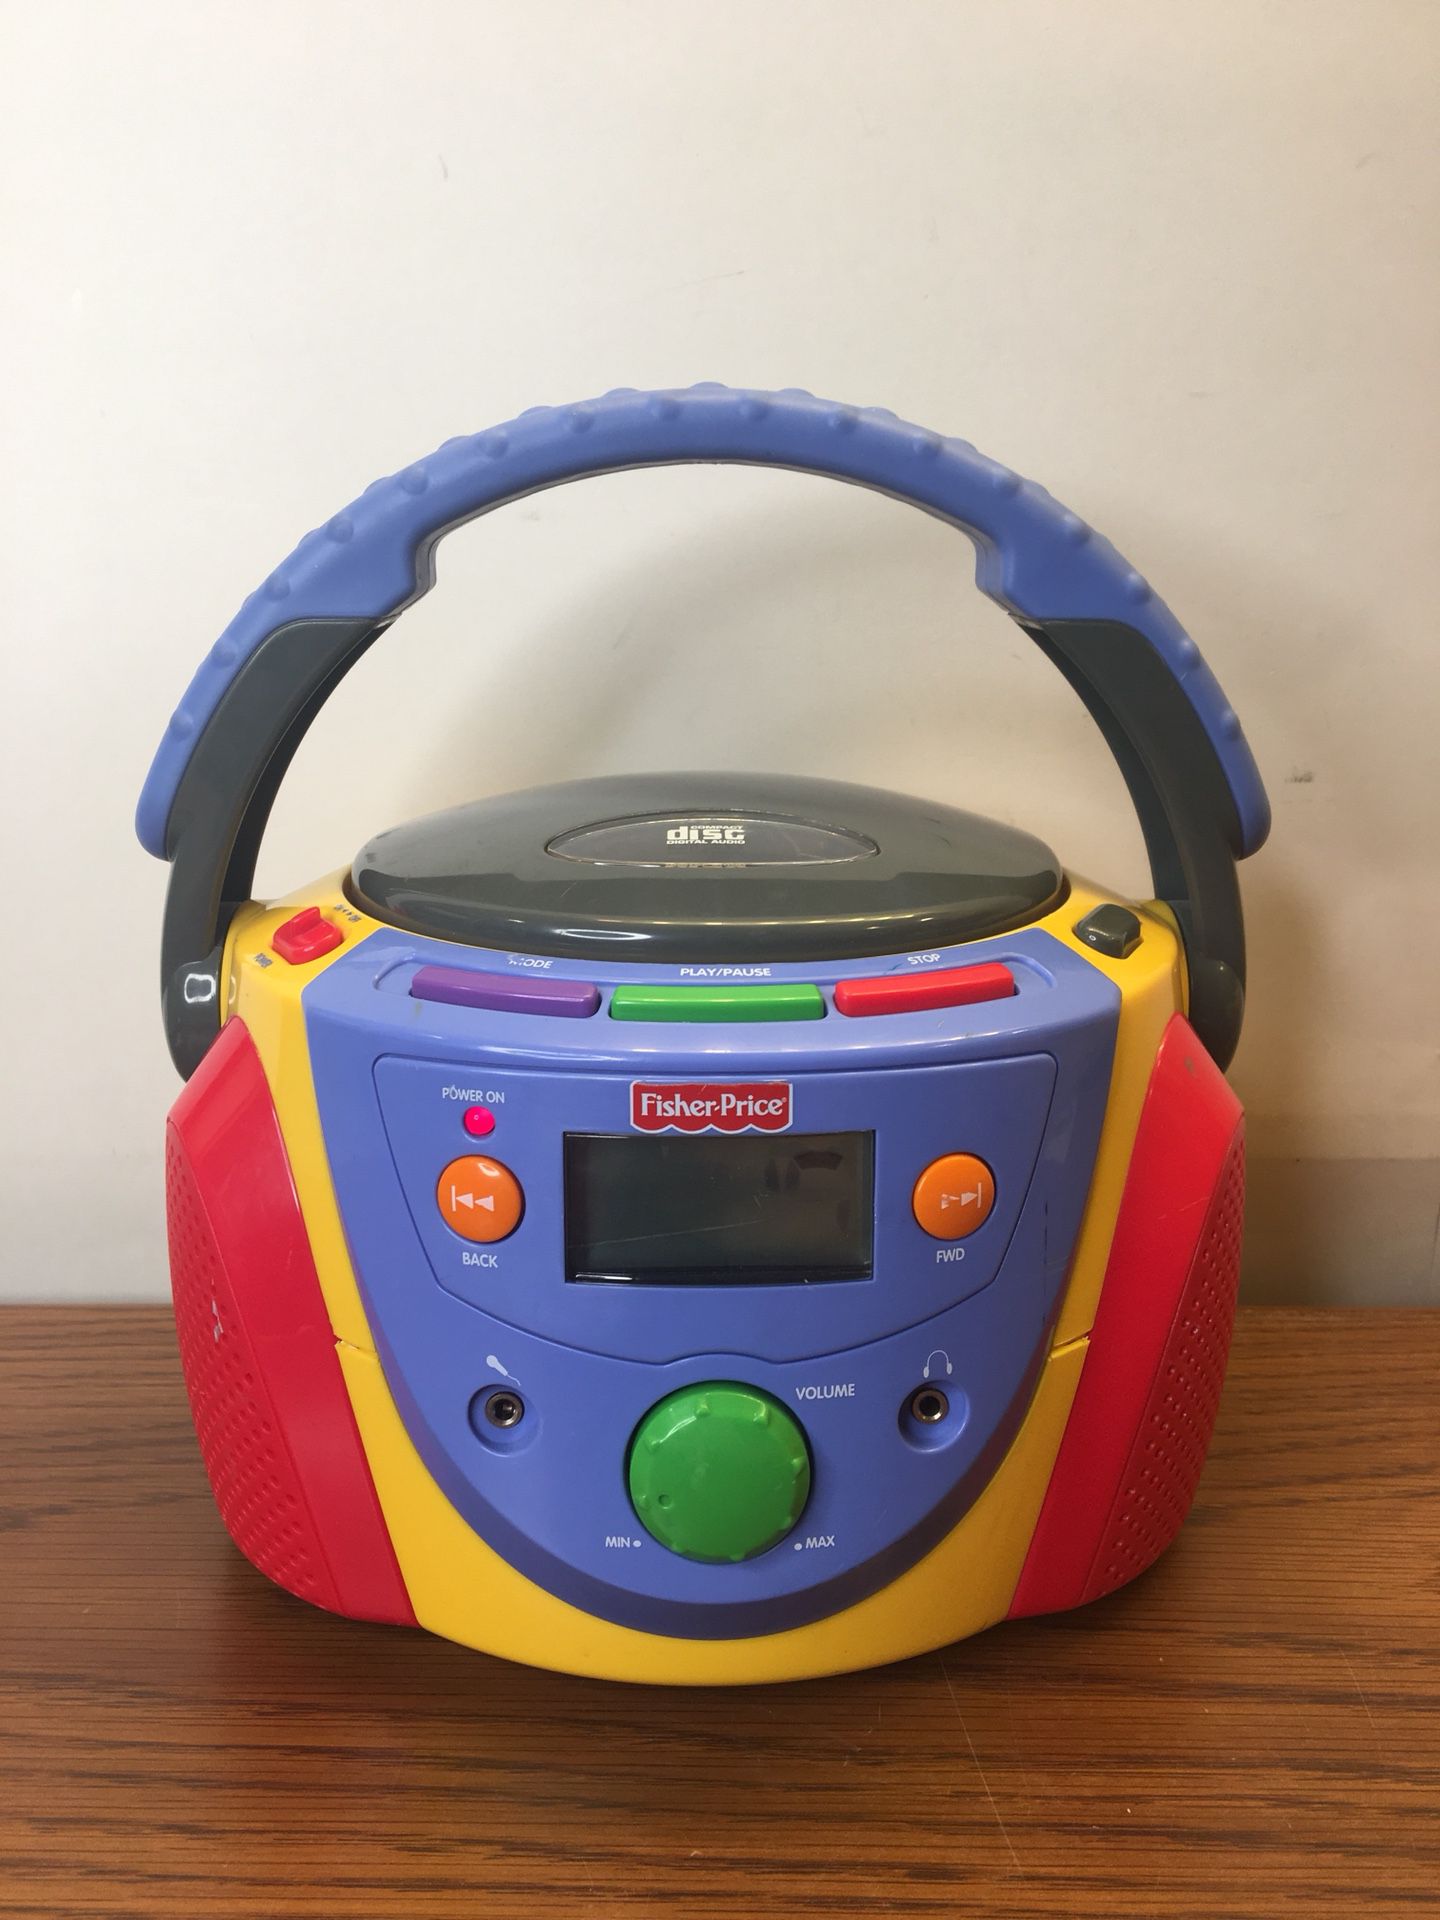 HTF Portable Disc CD Tuff Stuff Kid Yellow Boombox Fisher Price 2004 for in Elgin, IL - OfferUp